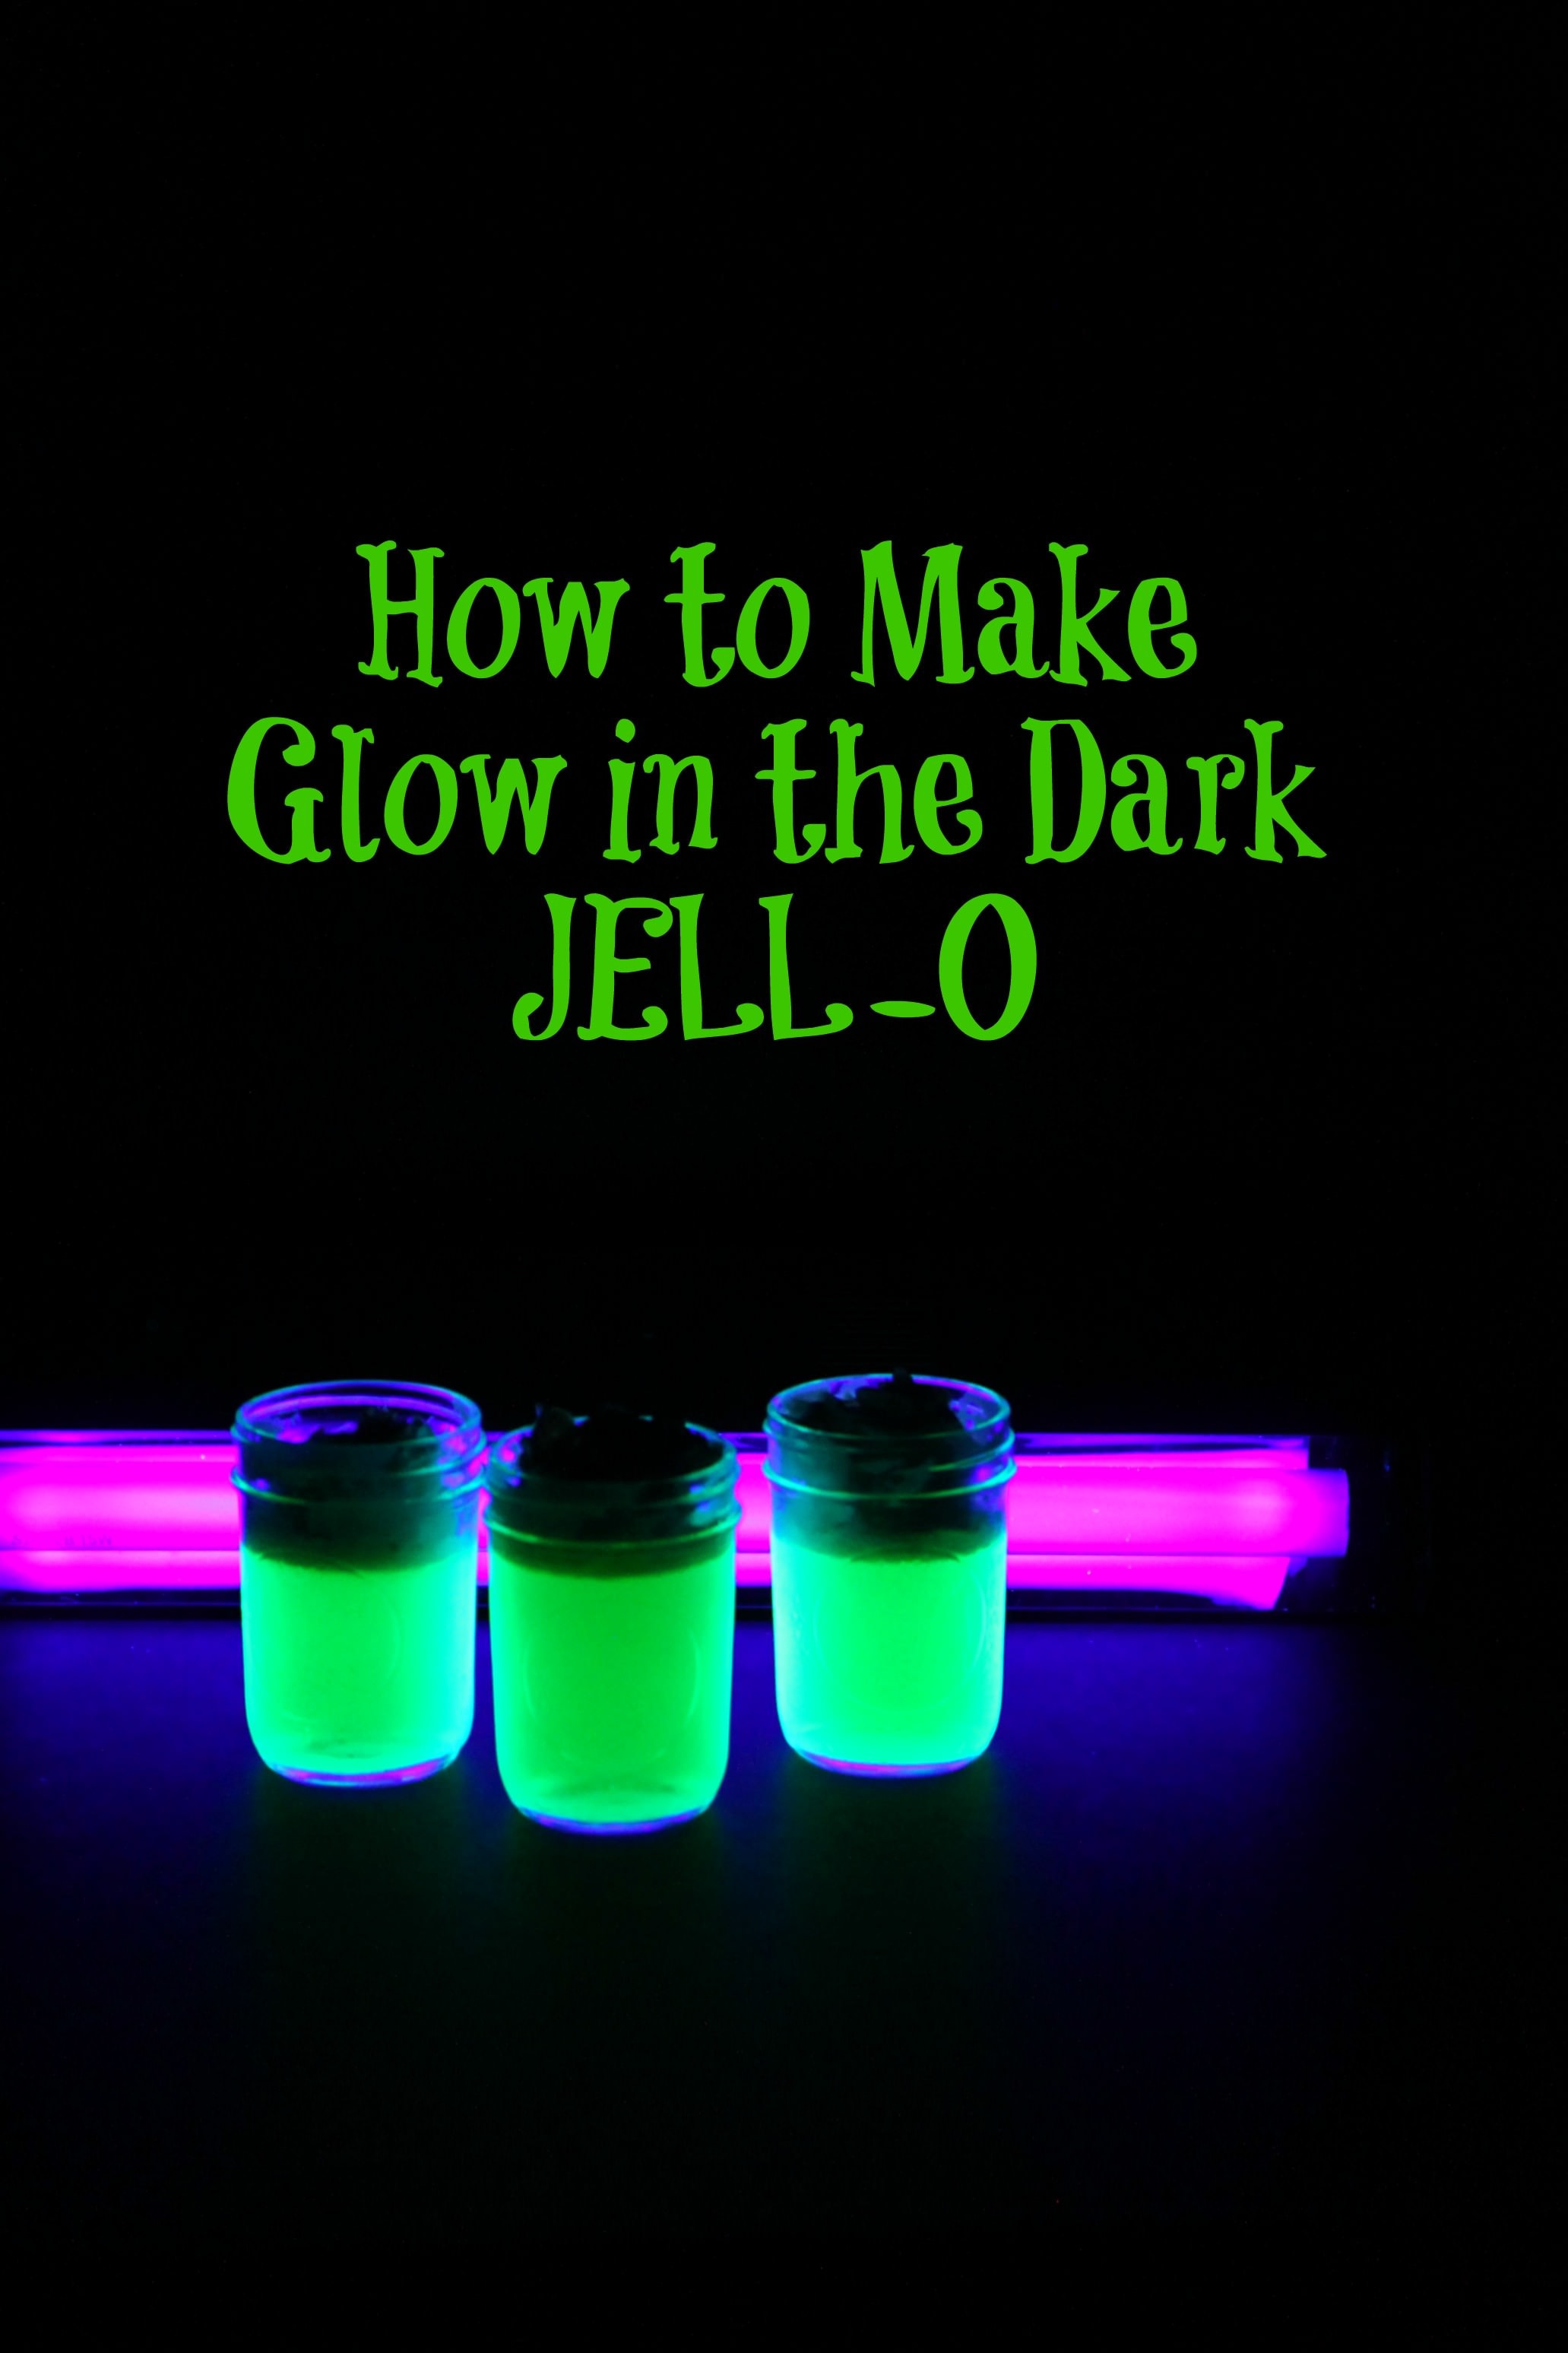 How to Make Glow in the Dark JELL-O